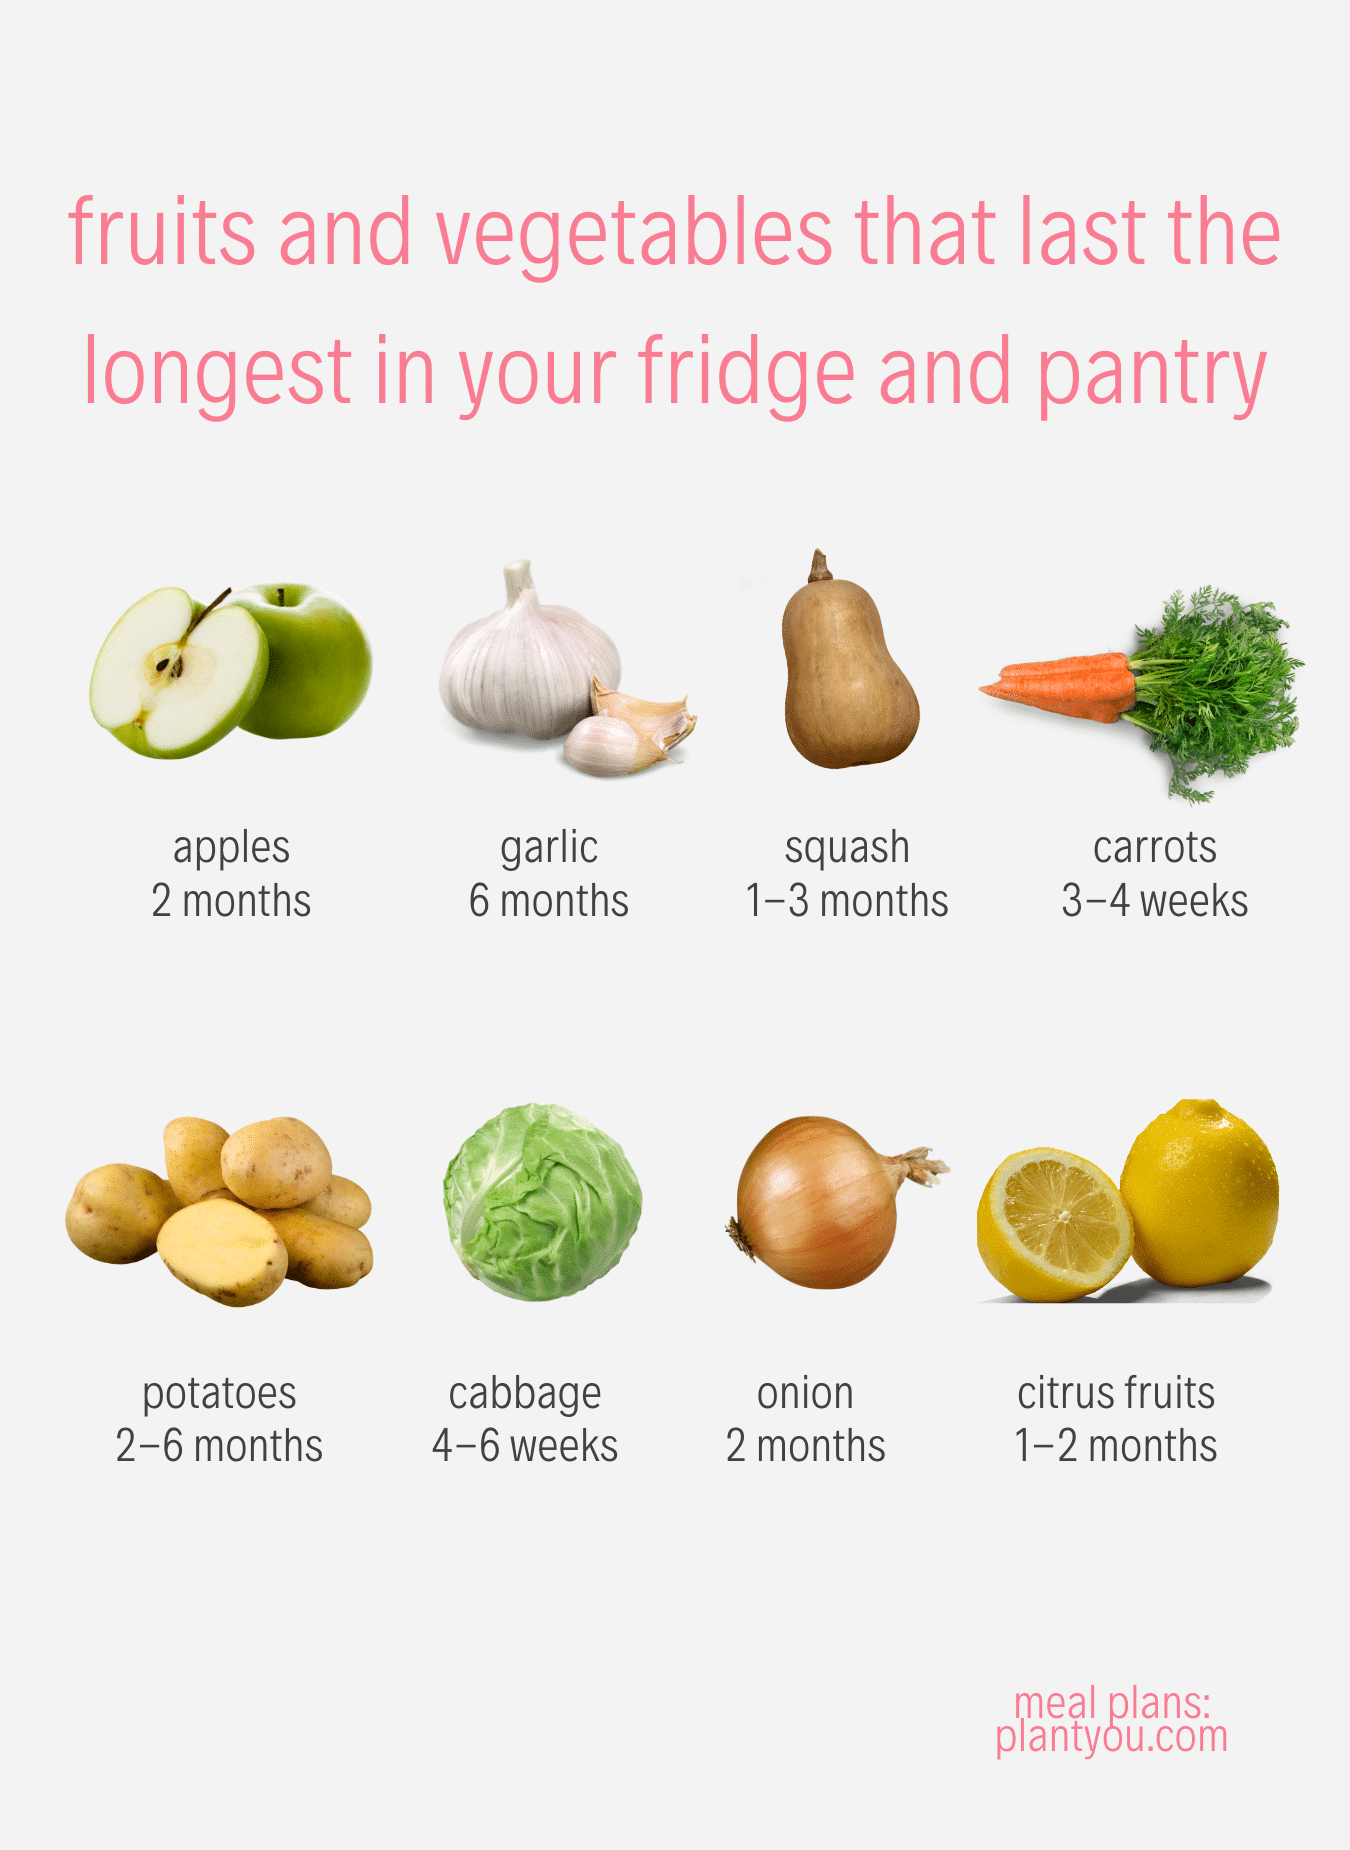 How to Store Fruits and Vegetables So They Last Longer